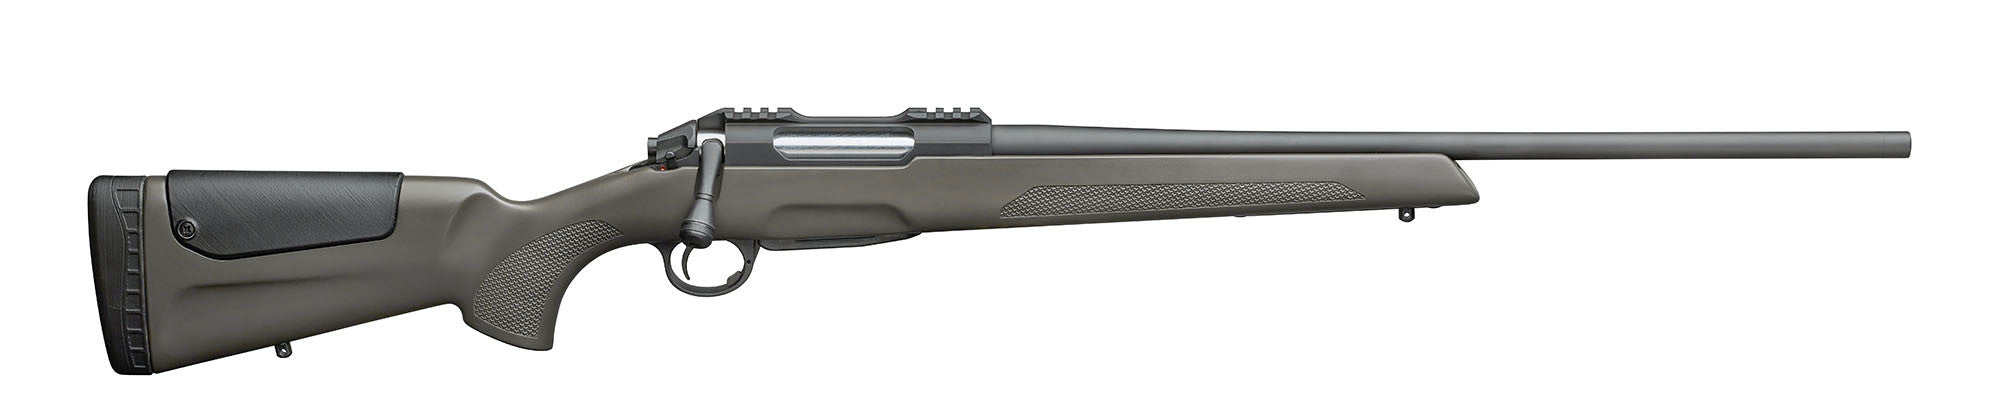 Rover Hunter Bolt Action Rifle